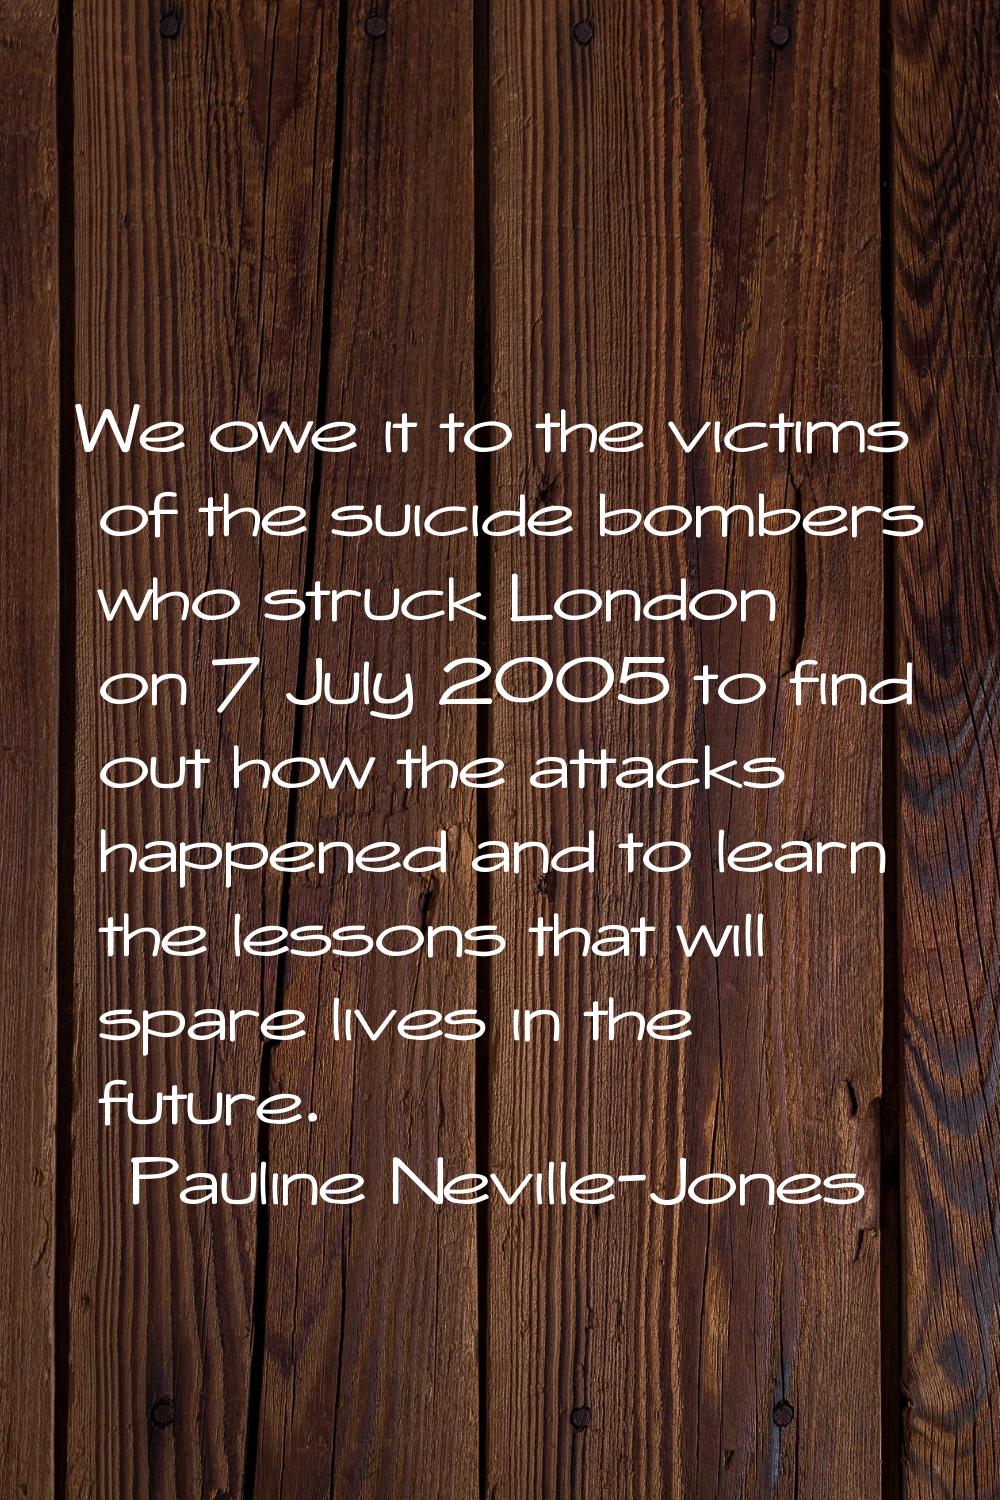 We owe it to the victims of the suicide bombers who struck London on 7 July 2005 to find out how th